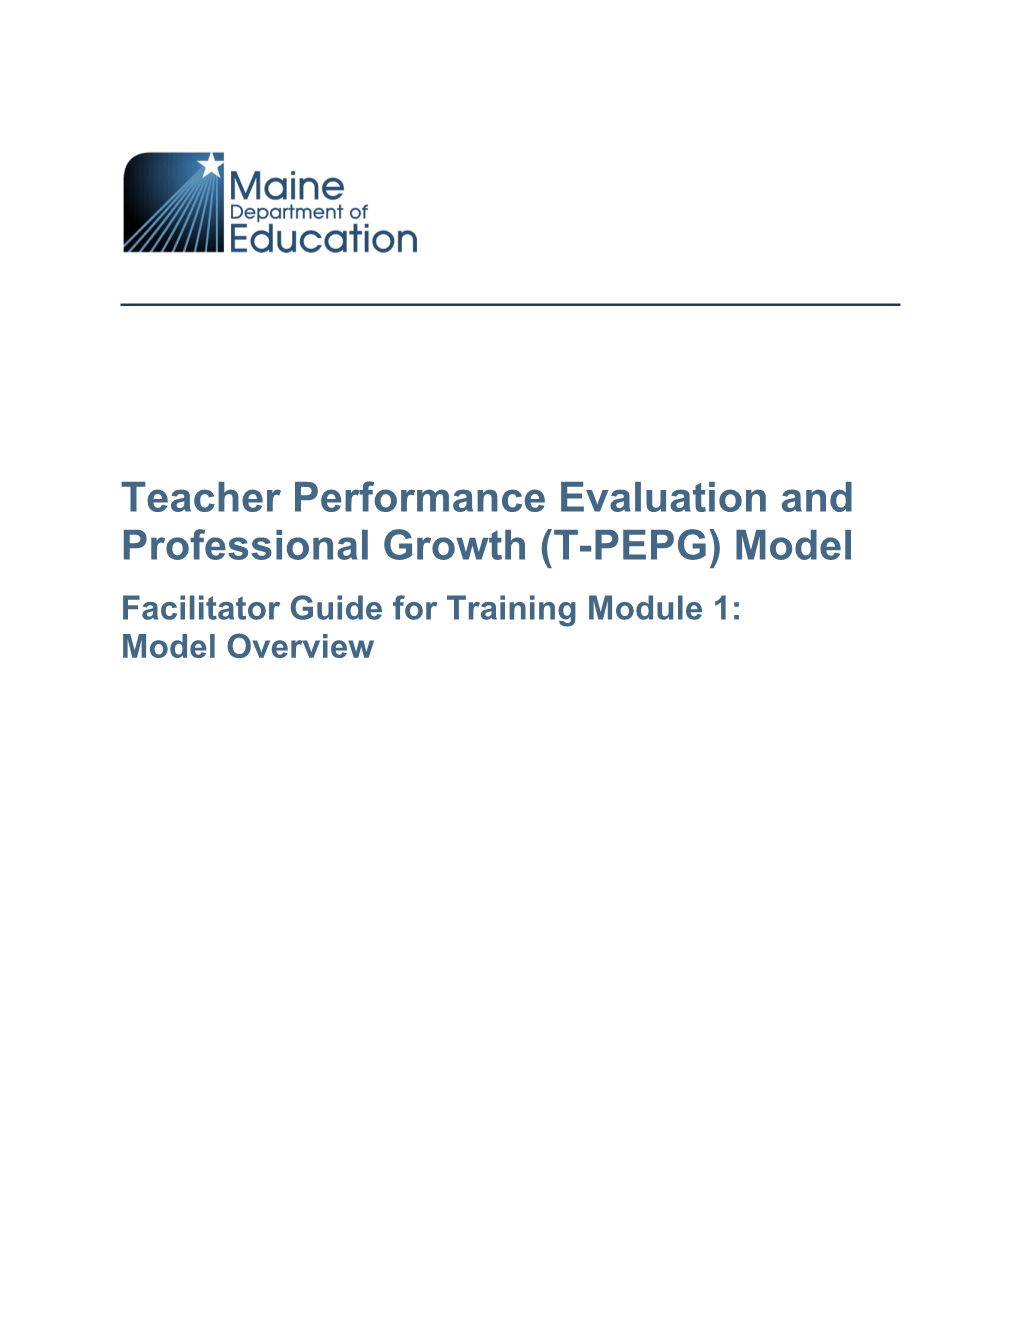 Teacher Performance Evaluation and Professional Growth (T-PEPG) Model